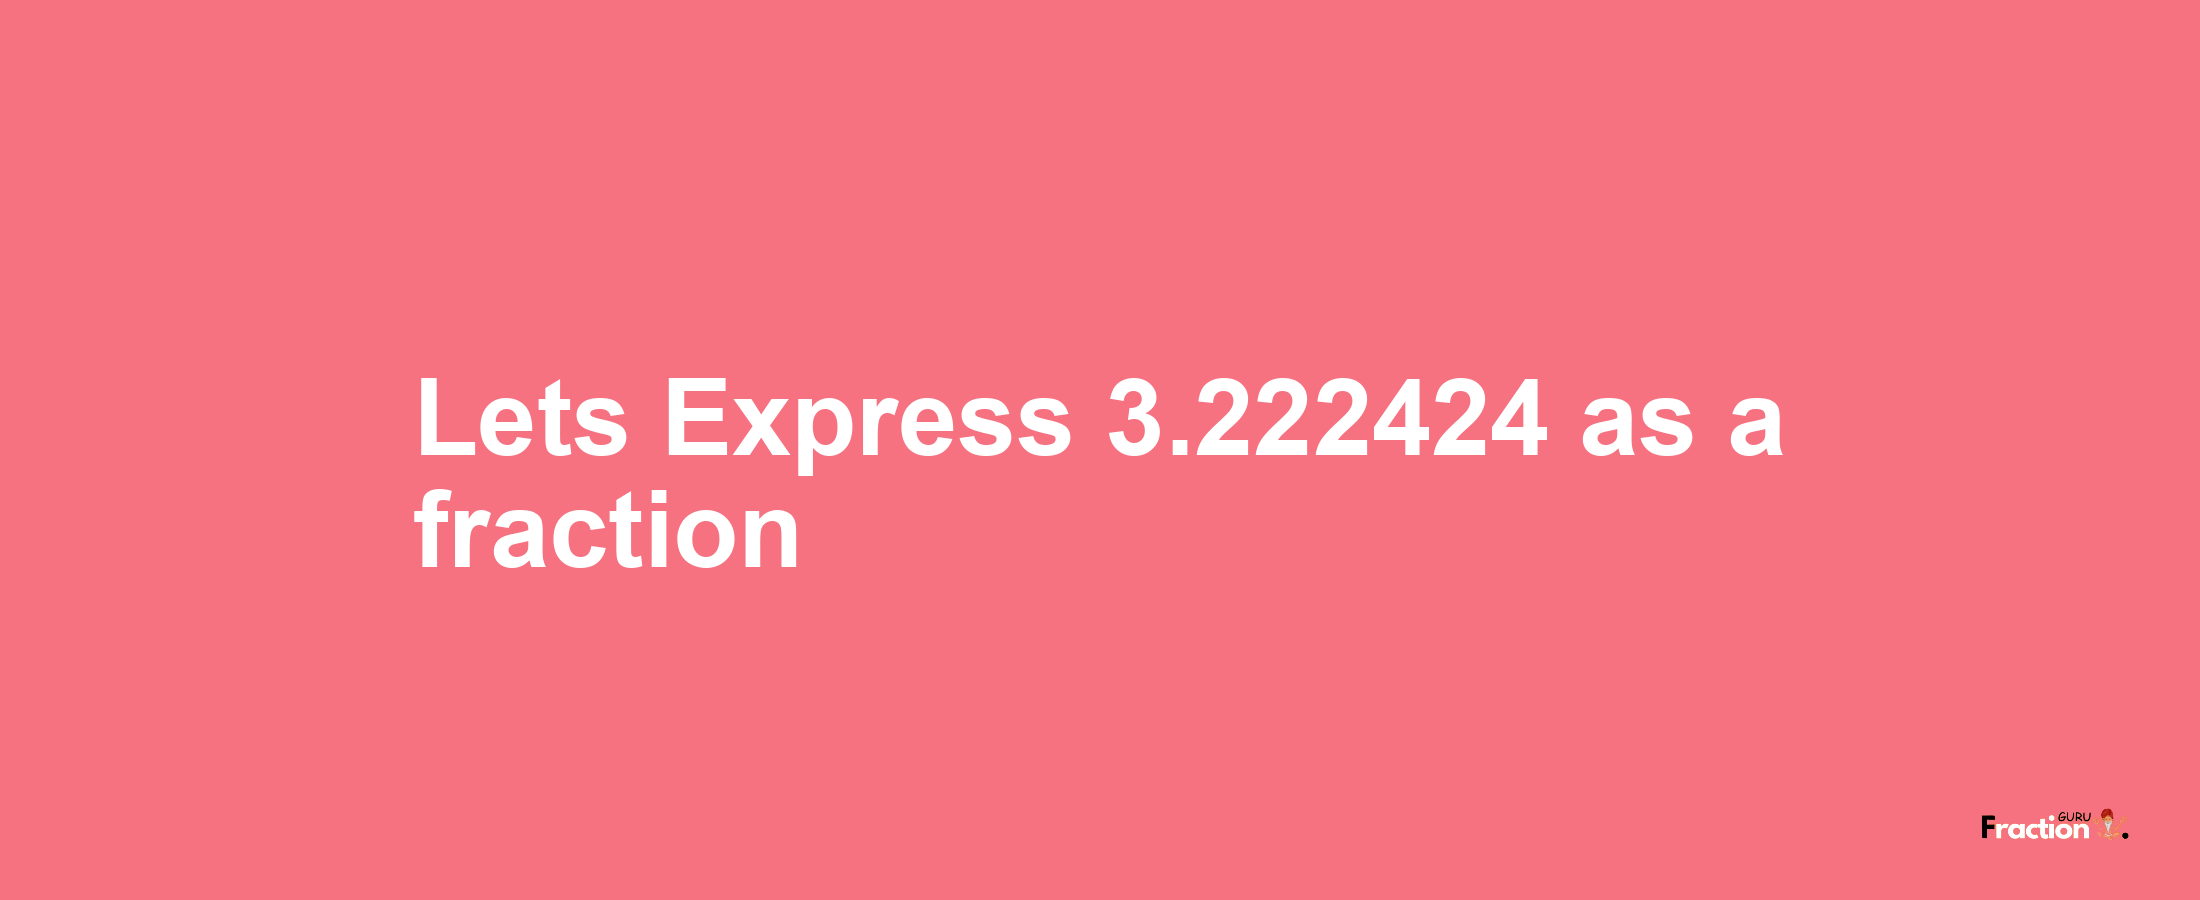 Lets Express 3.222424 as afraction